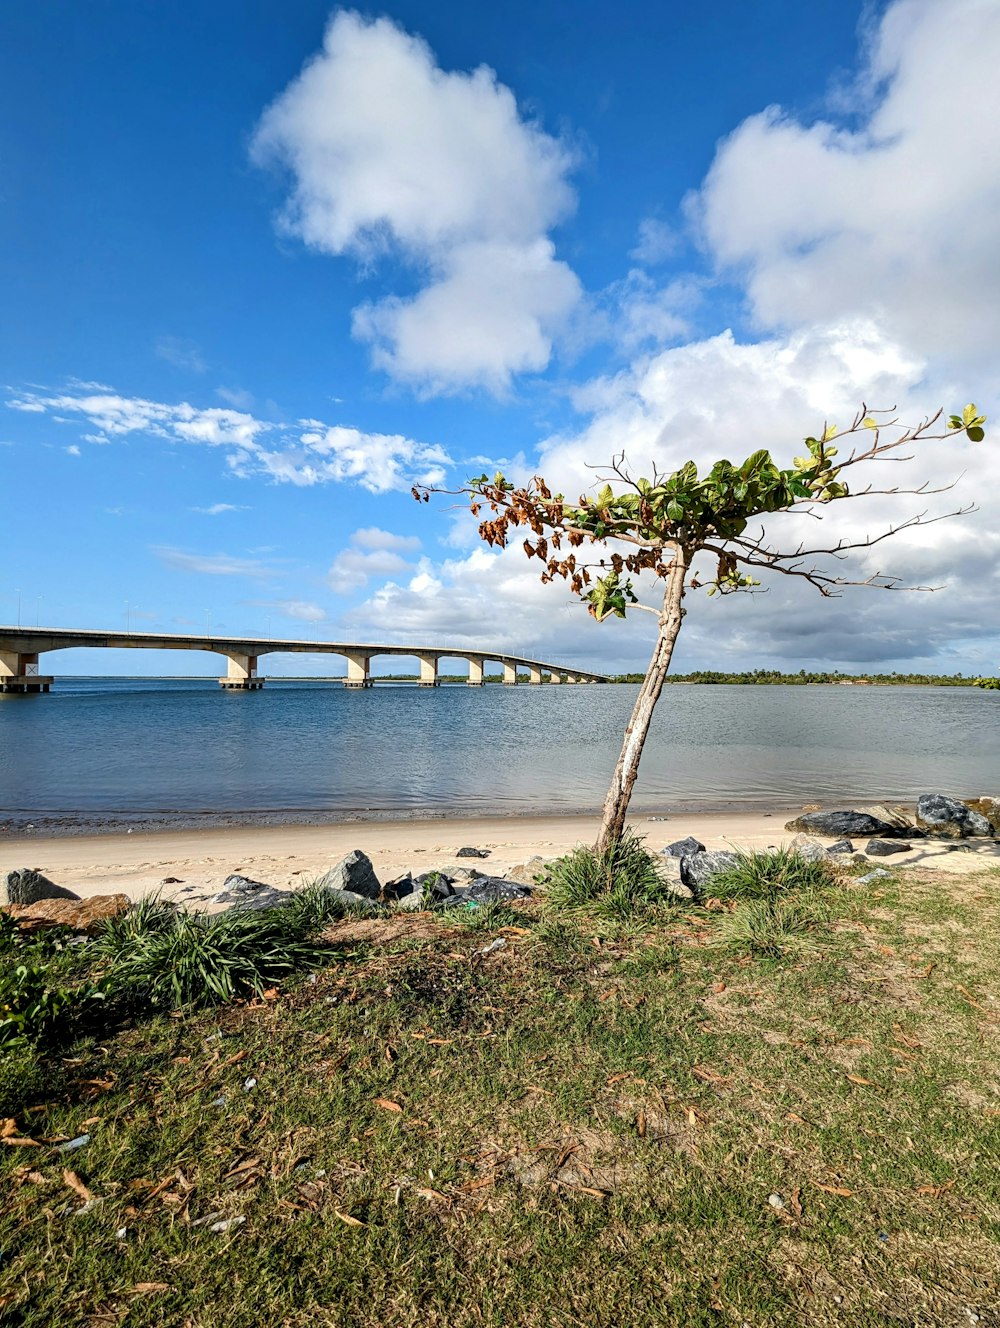 a tree on the shore of a beach with a bridge in the background